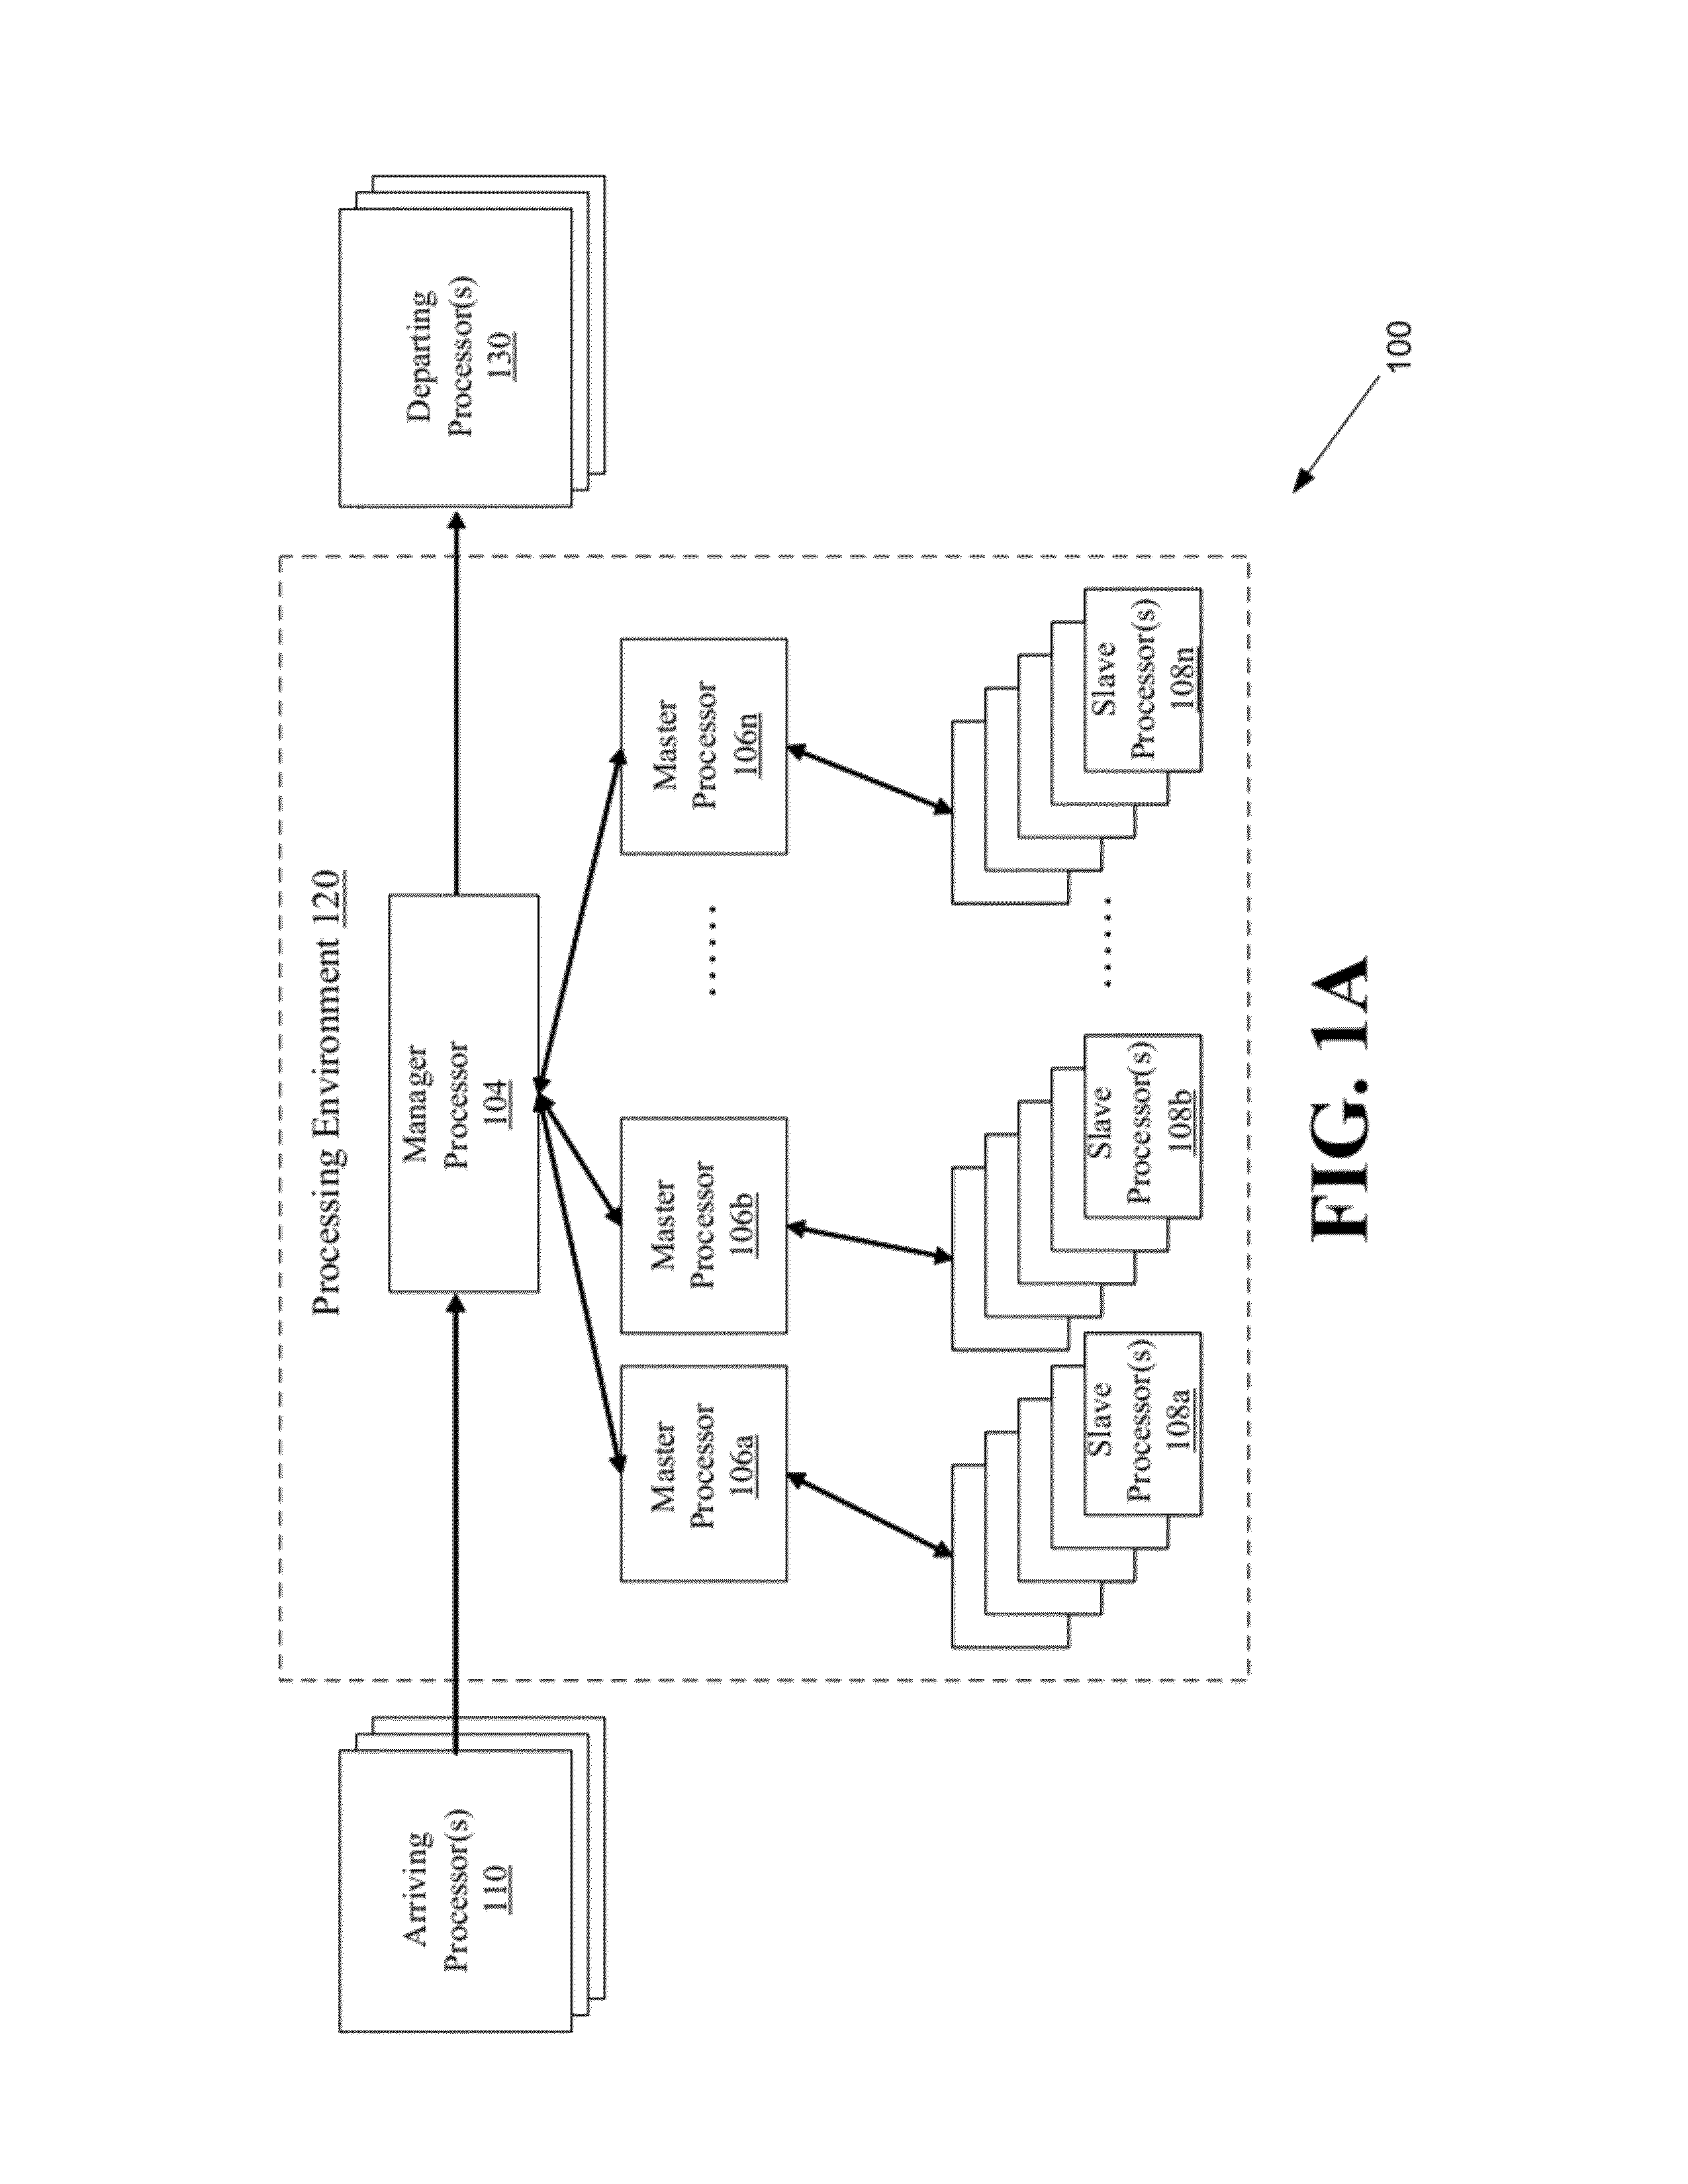 Systems and methods for generating random feasible solutions for an evolutionary process